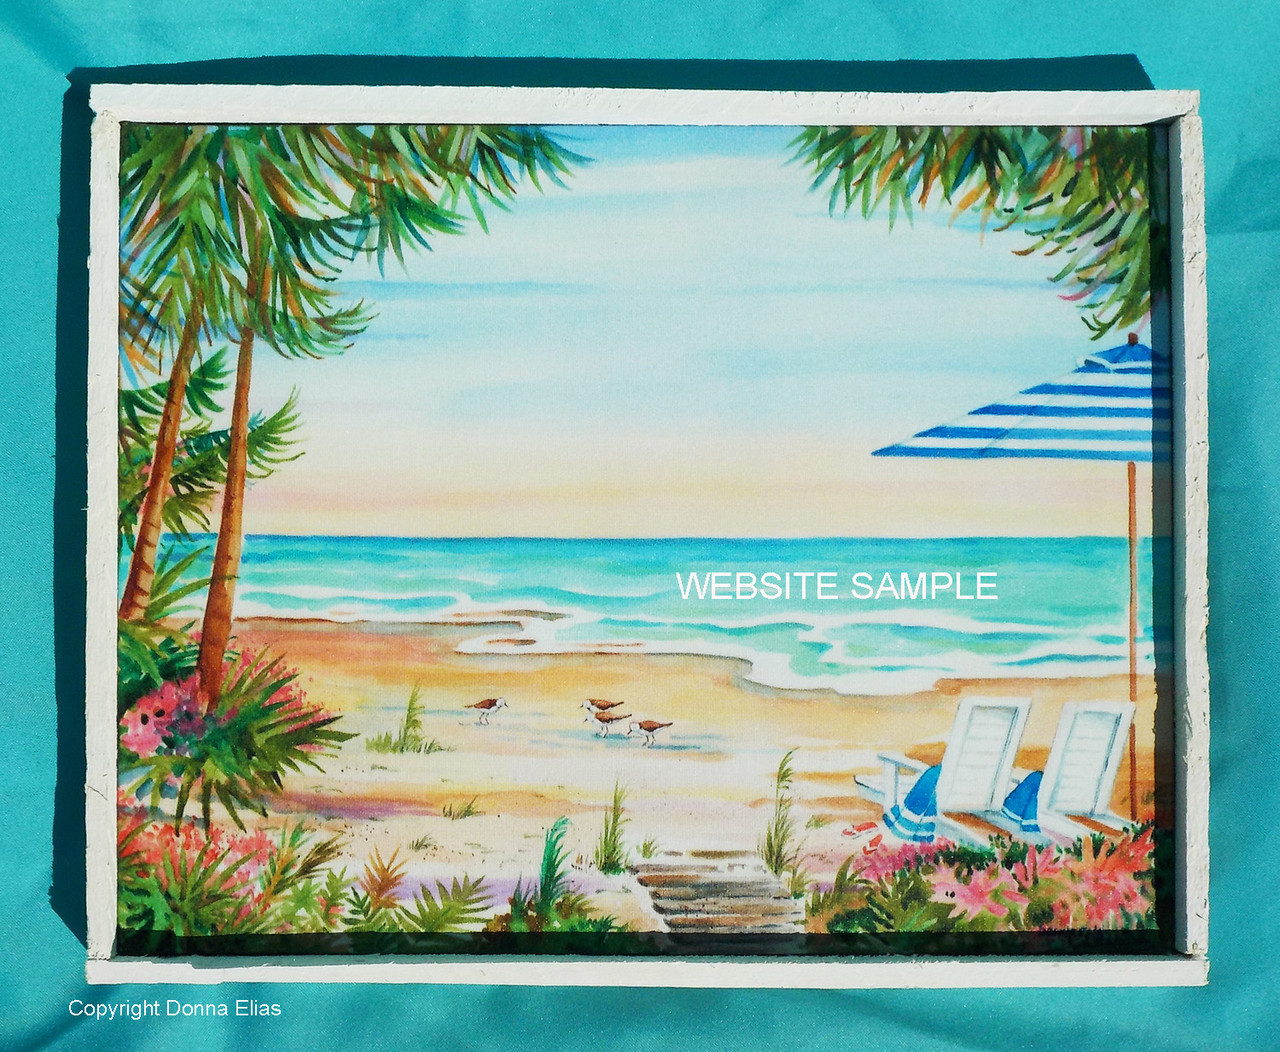 Tropical Serenity copyright Donna Elias in 11" x 14" Rustic White Sand Dune Fence Frame.